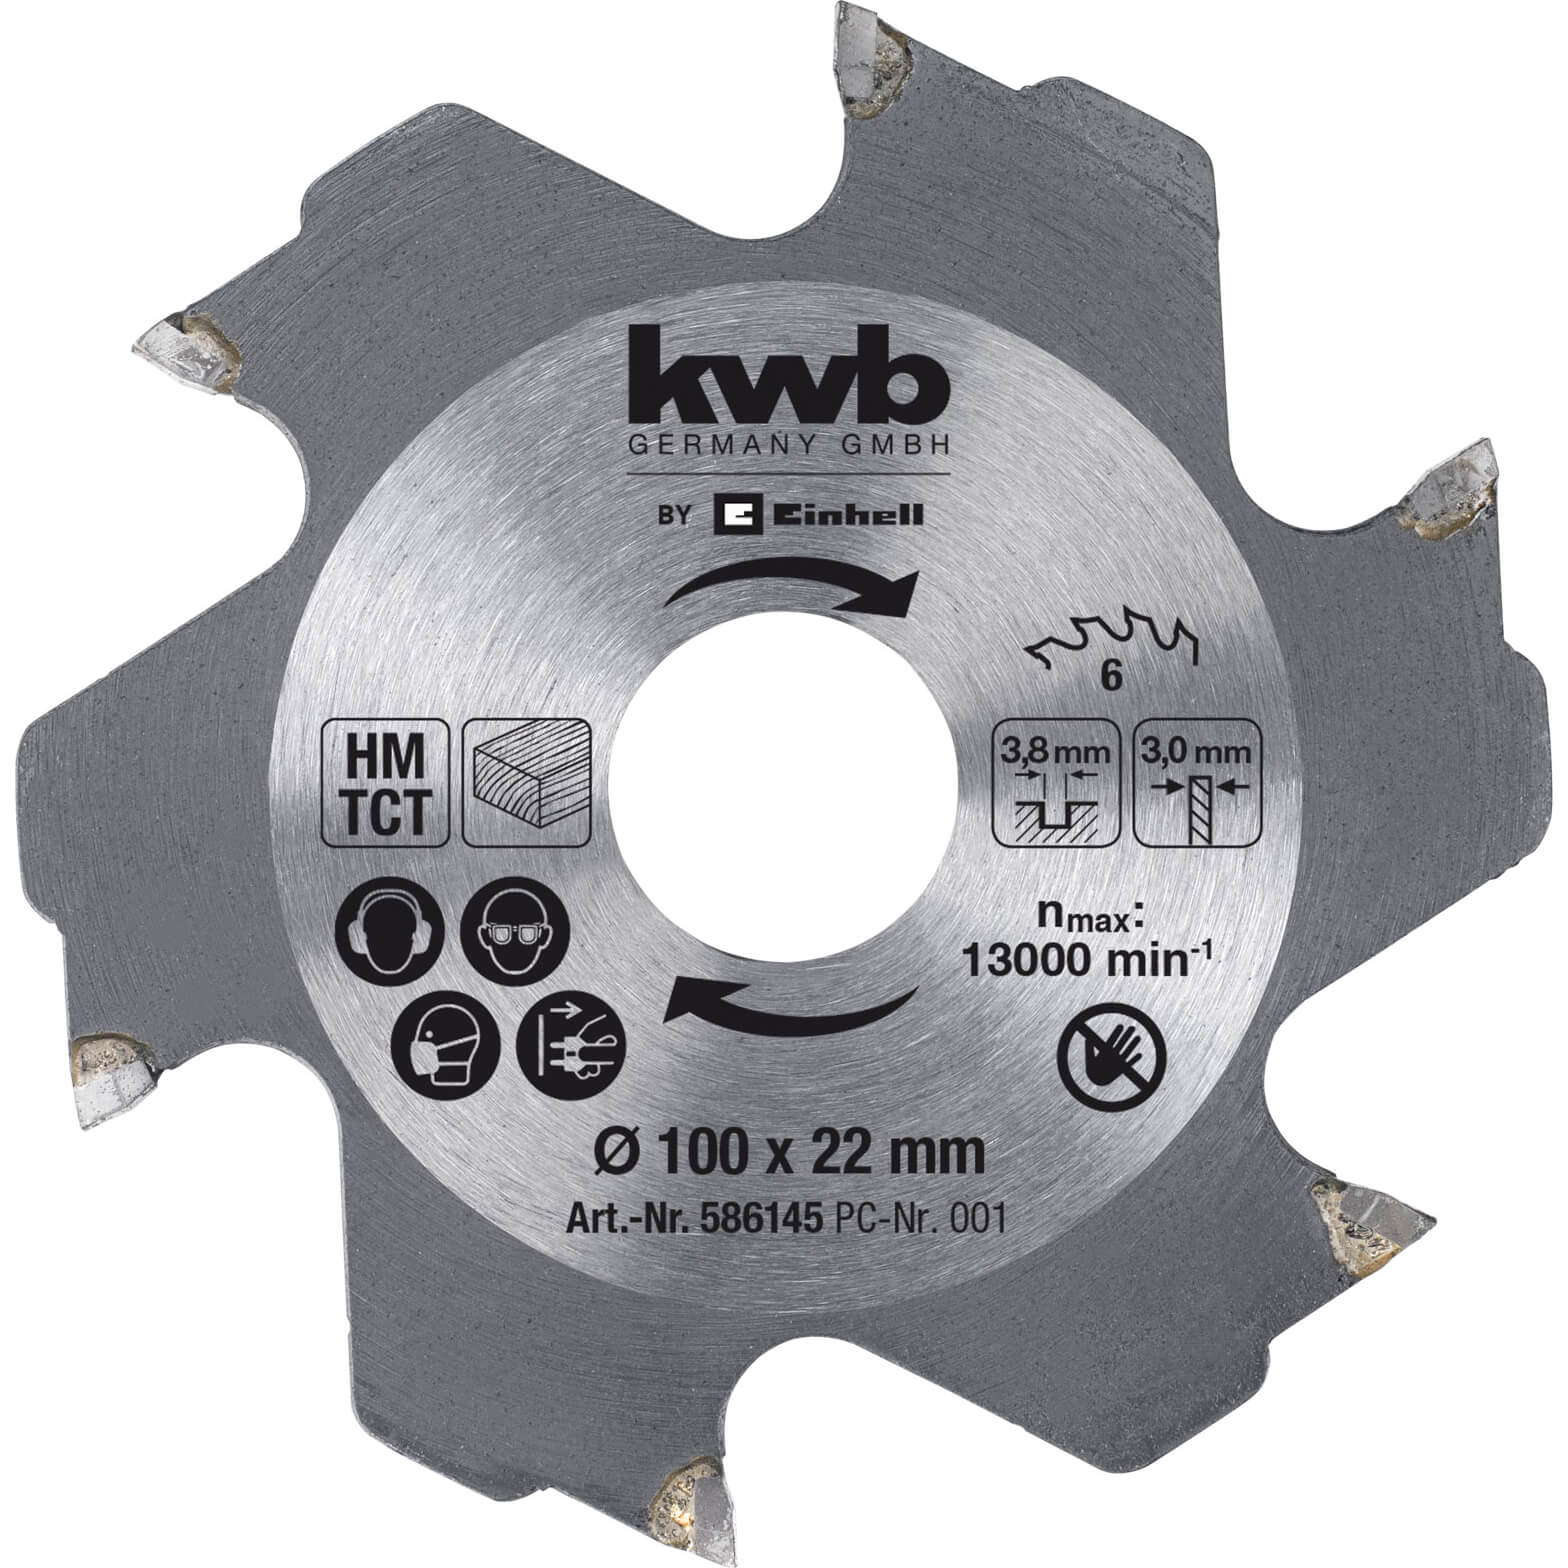 Image of Einhell TCT Biscuit Jointer Saw Blade 100mm 6T 22mm